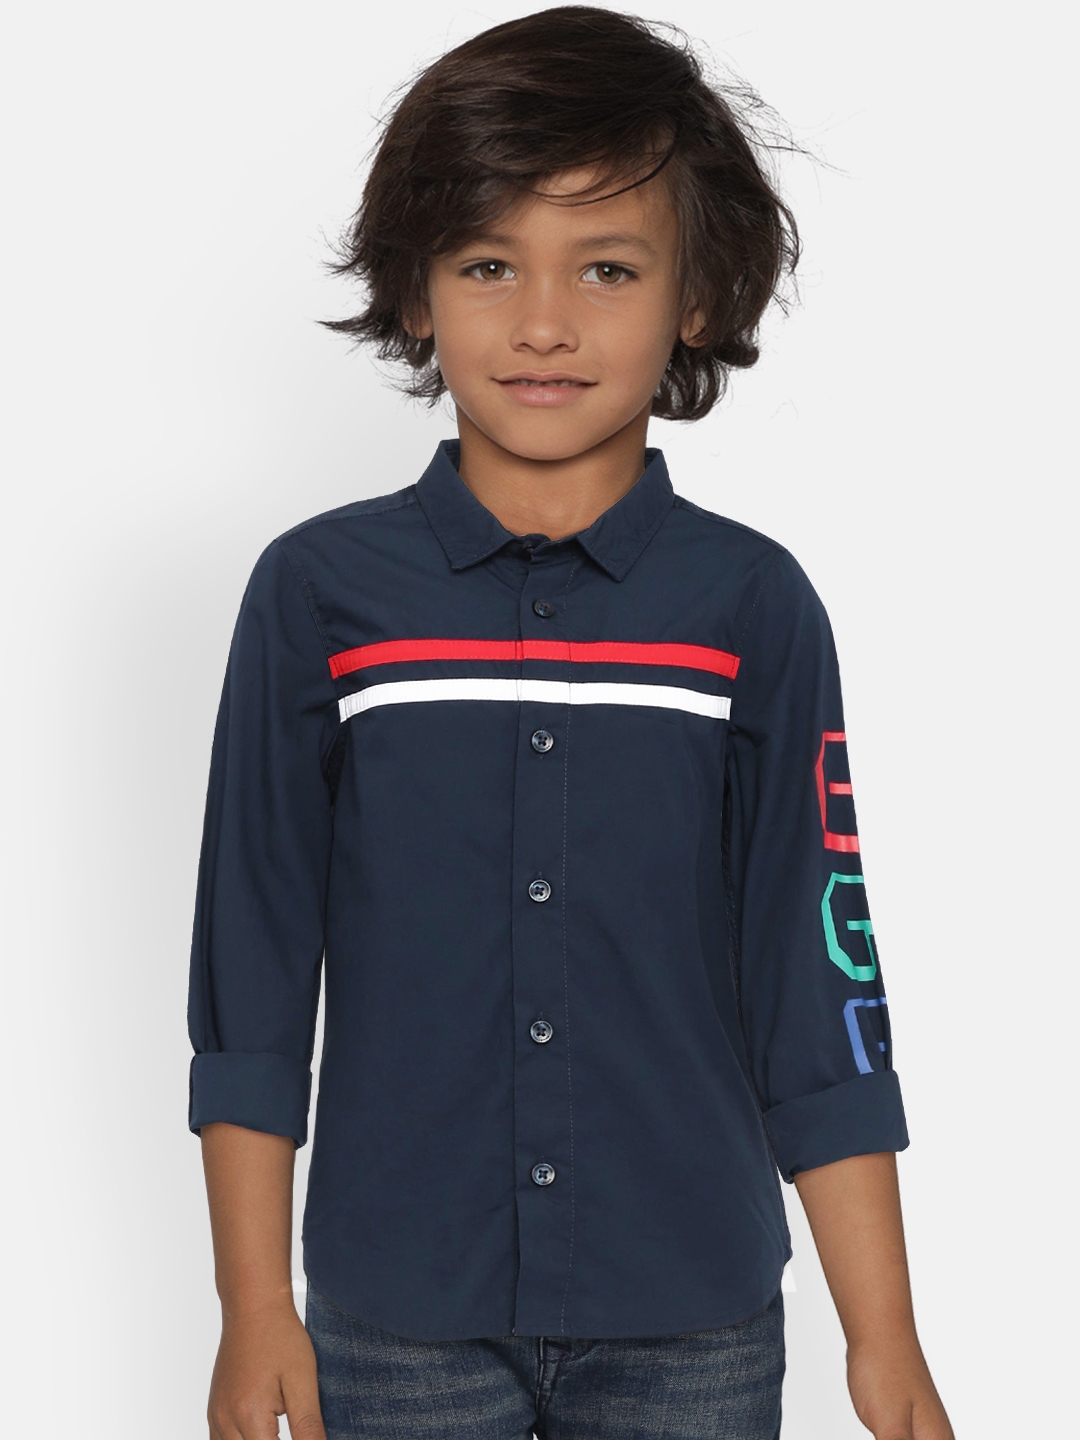 United Colors of Benetton Boys Regular Fit Casual Shirt 